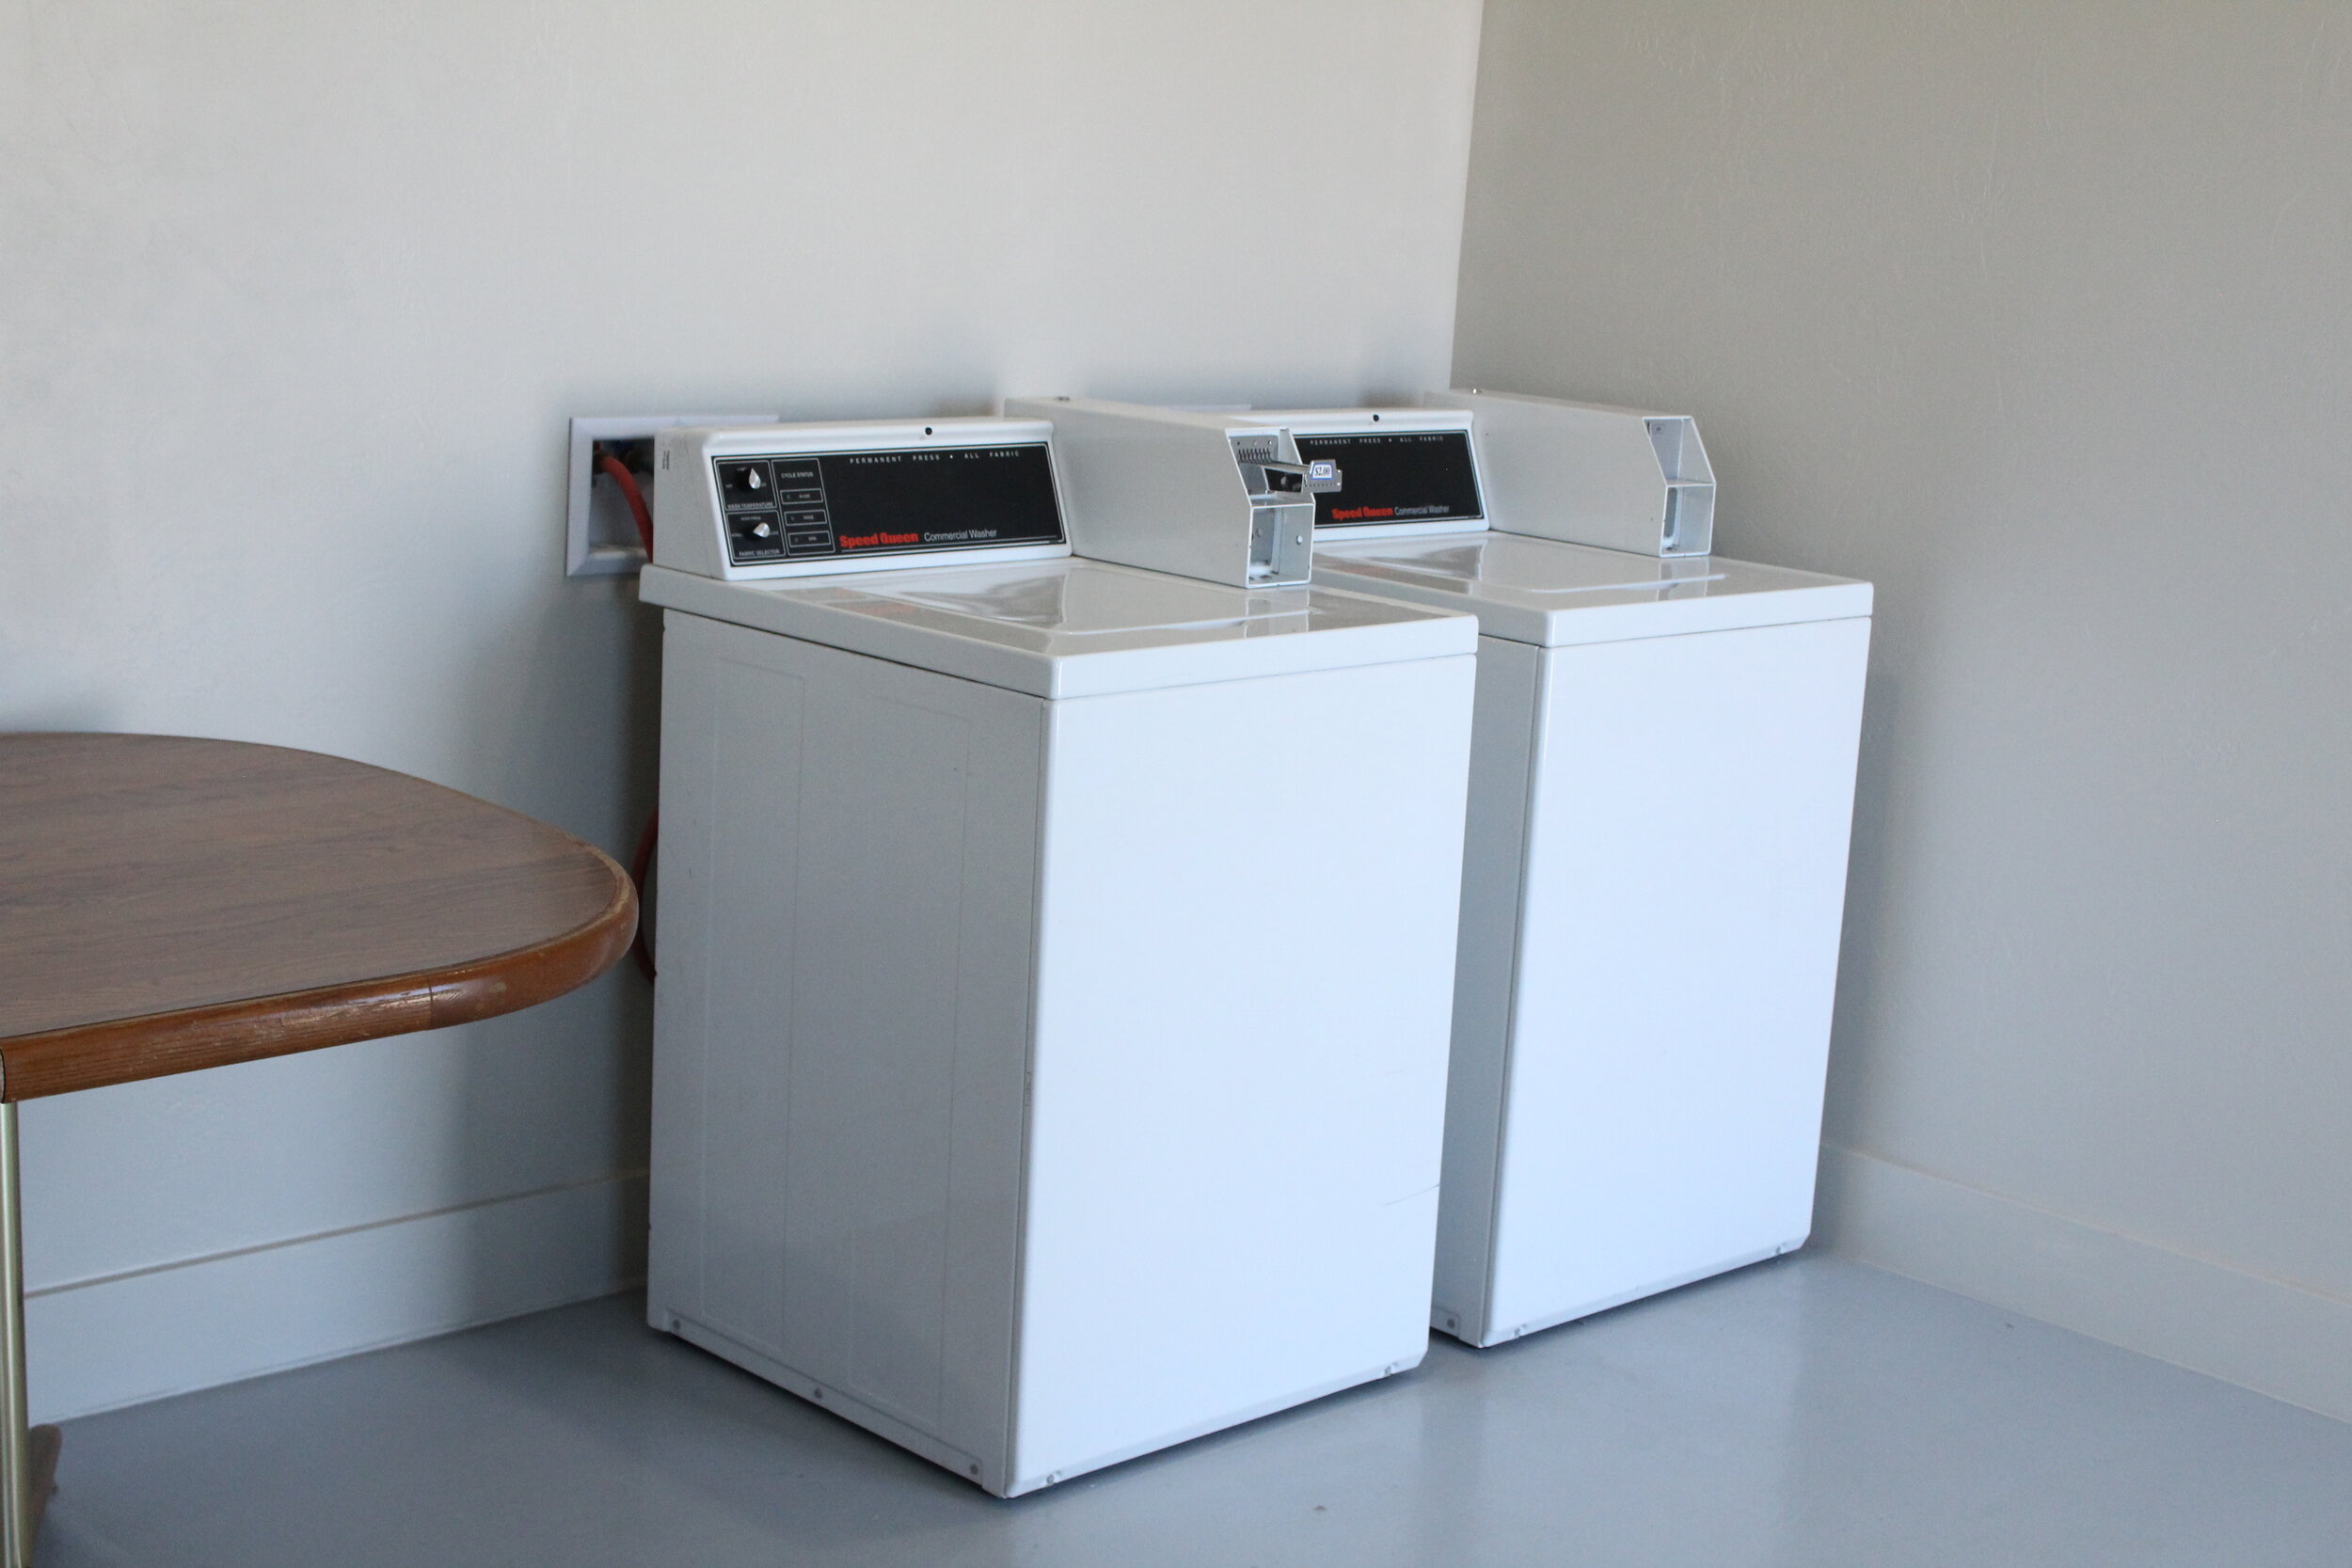 Clothes Washers - Laundry Machines